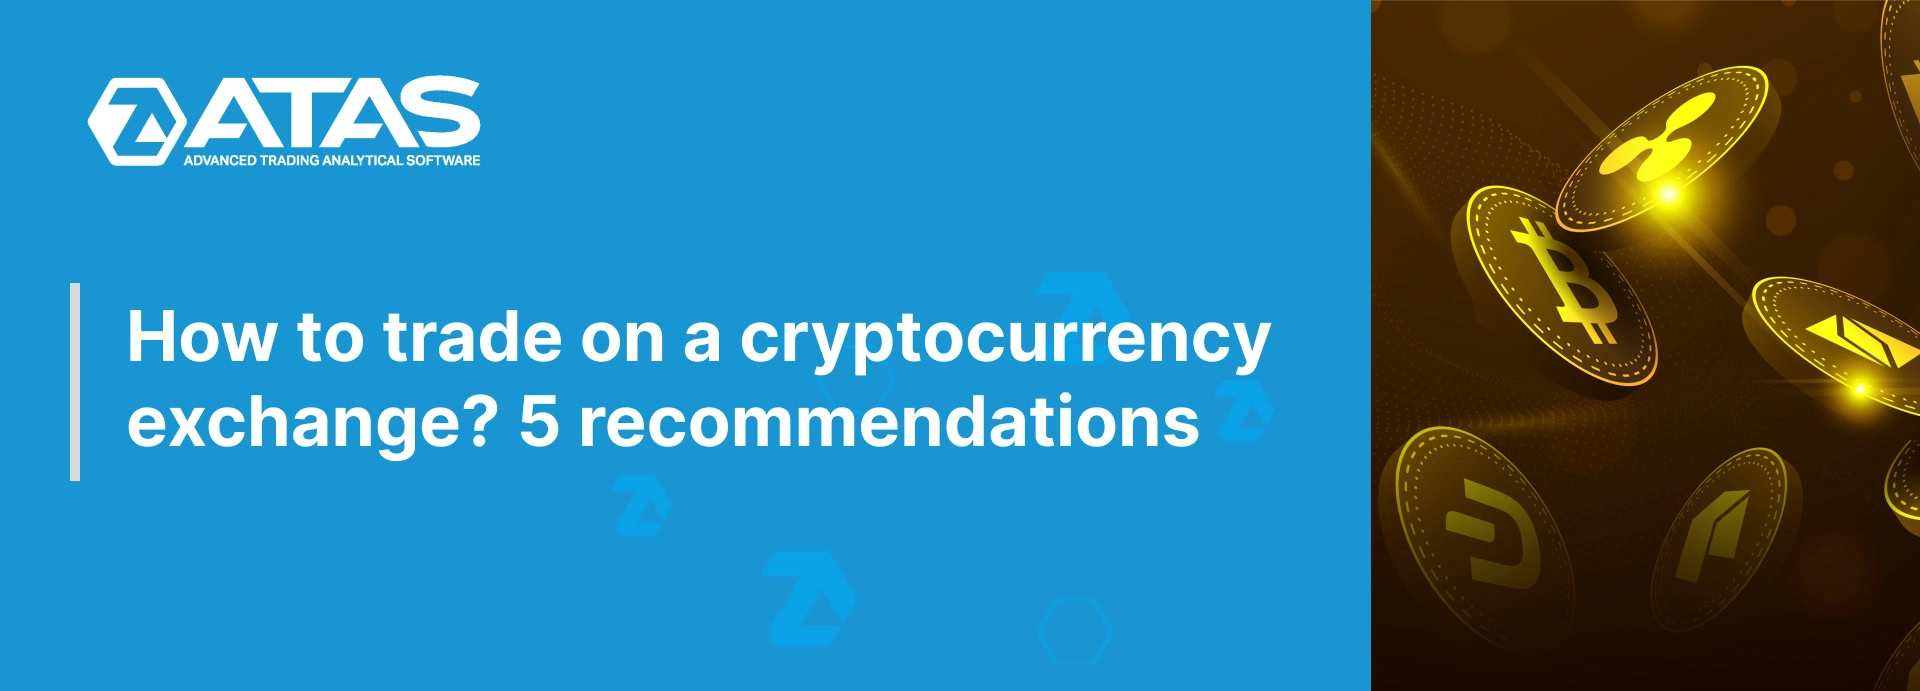 How to trade on a cryptocurrency exchange 5 recommendations